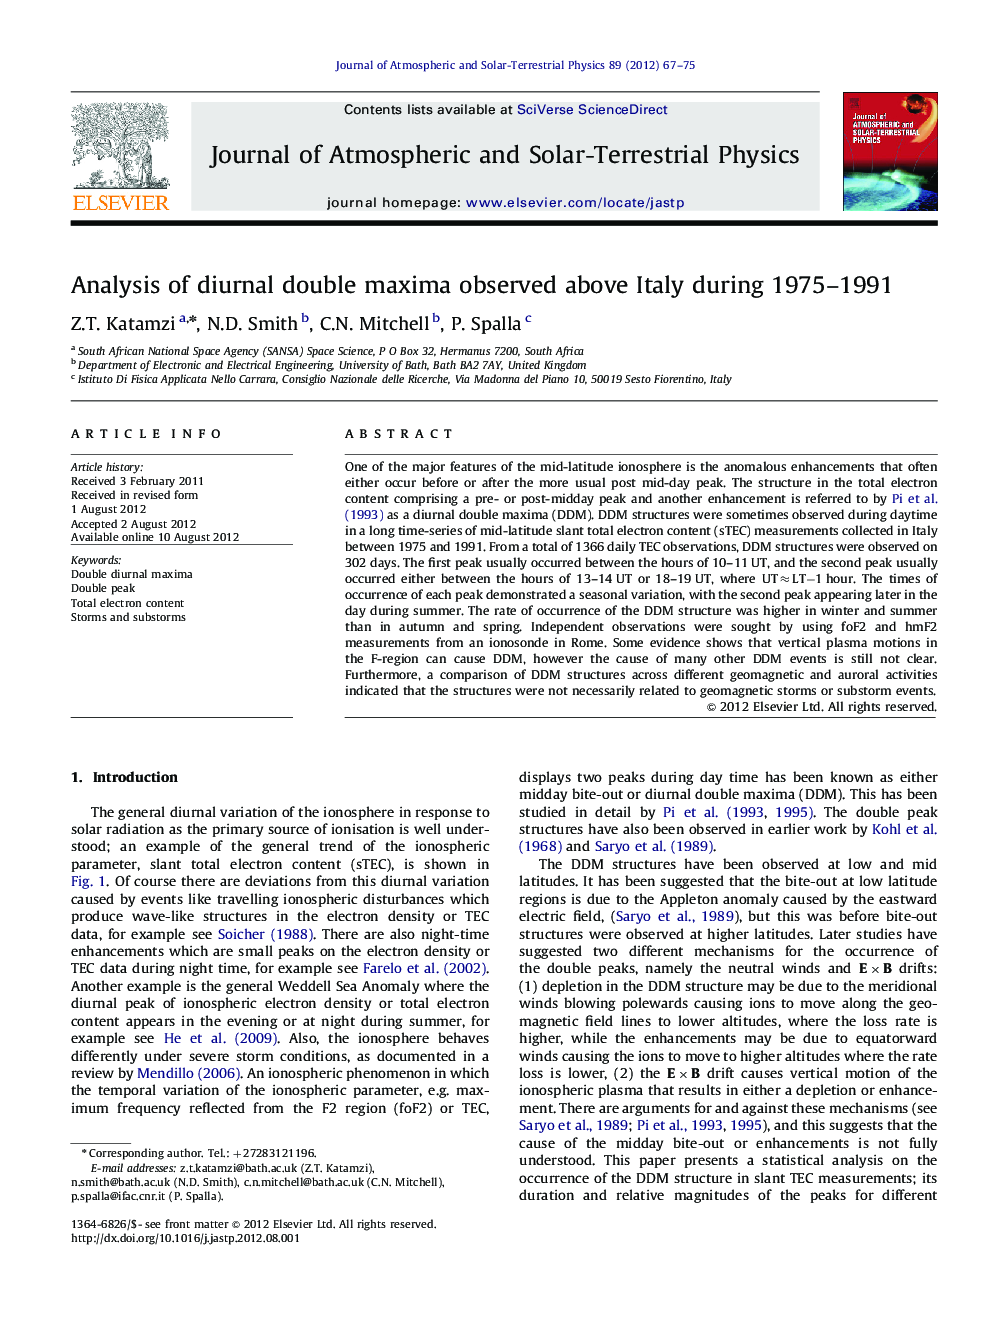 Analysis of diurnal double maxima observed above Italy during 1975-1991